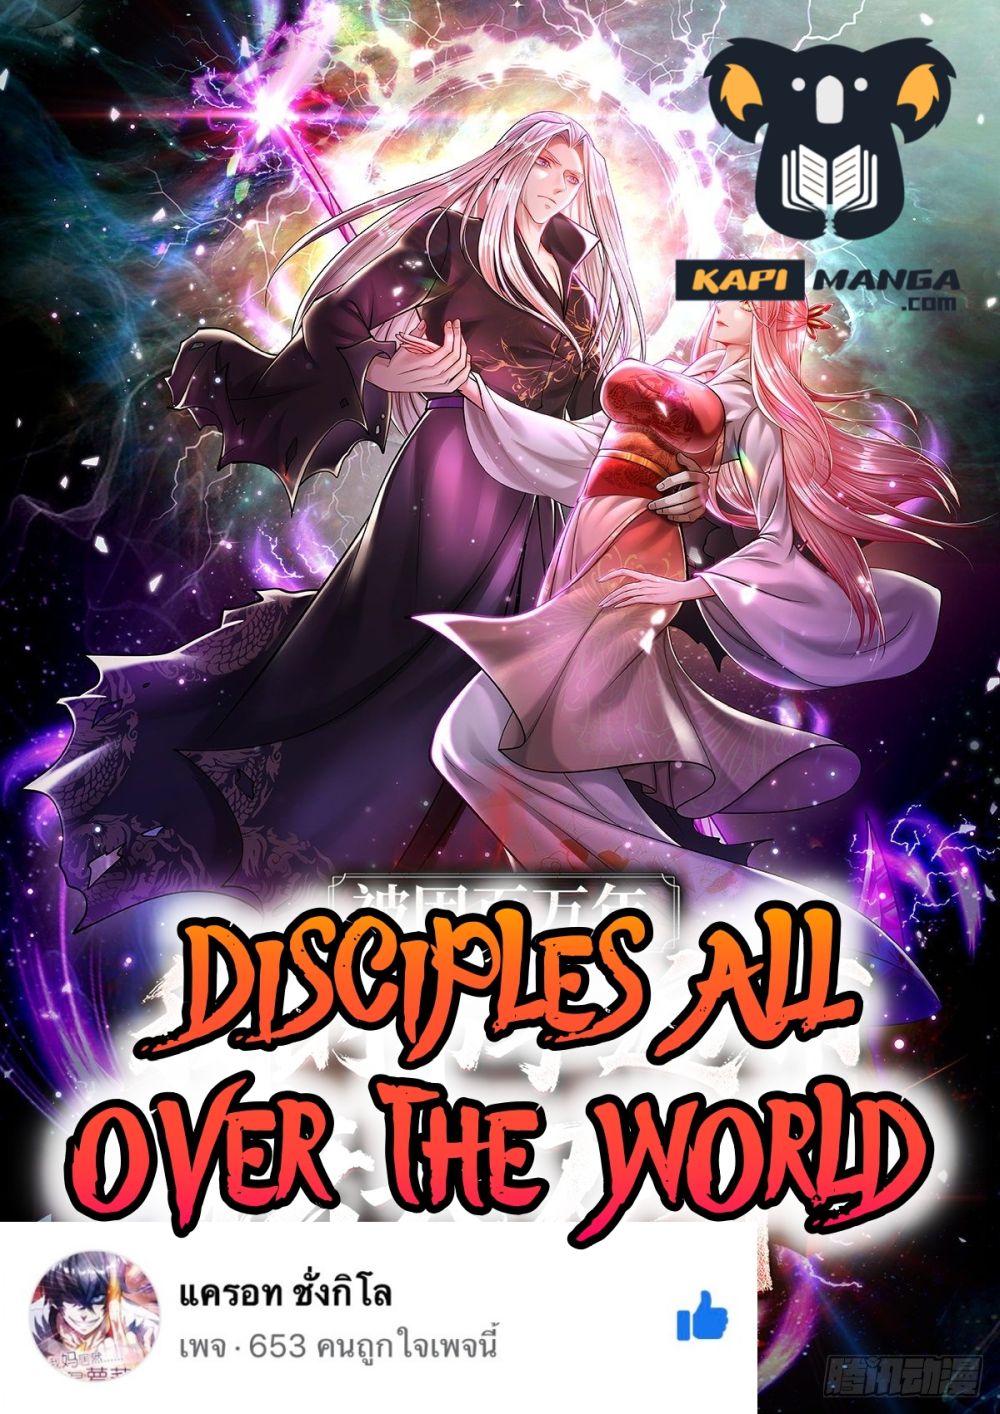 Disciples All Over the World à¸à¸­à¸à¸à¸µà¹ 35 (1)